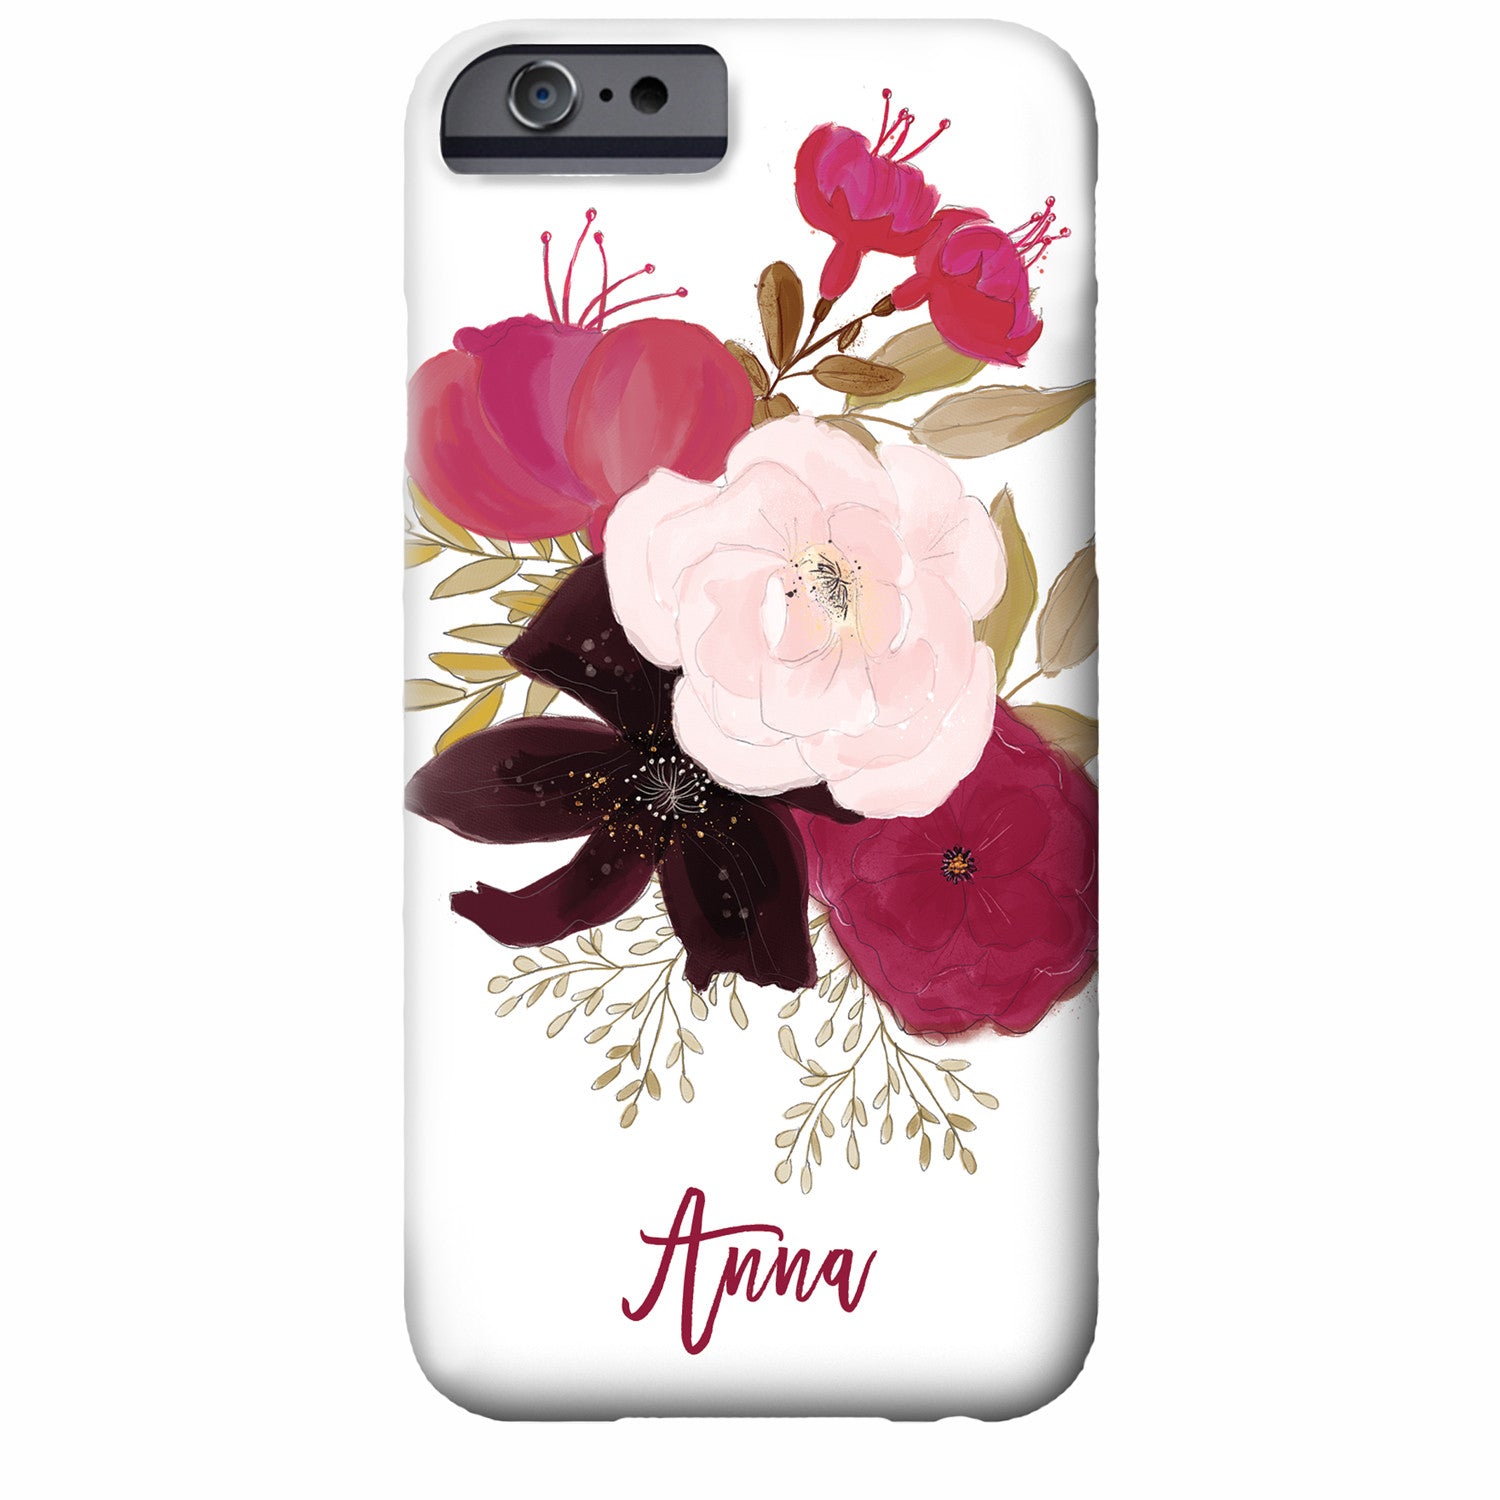 Floral Watercolor iPhone Case (shades of plum)